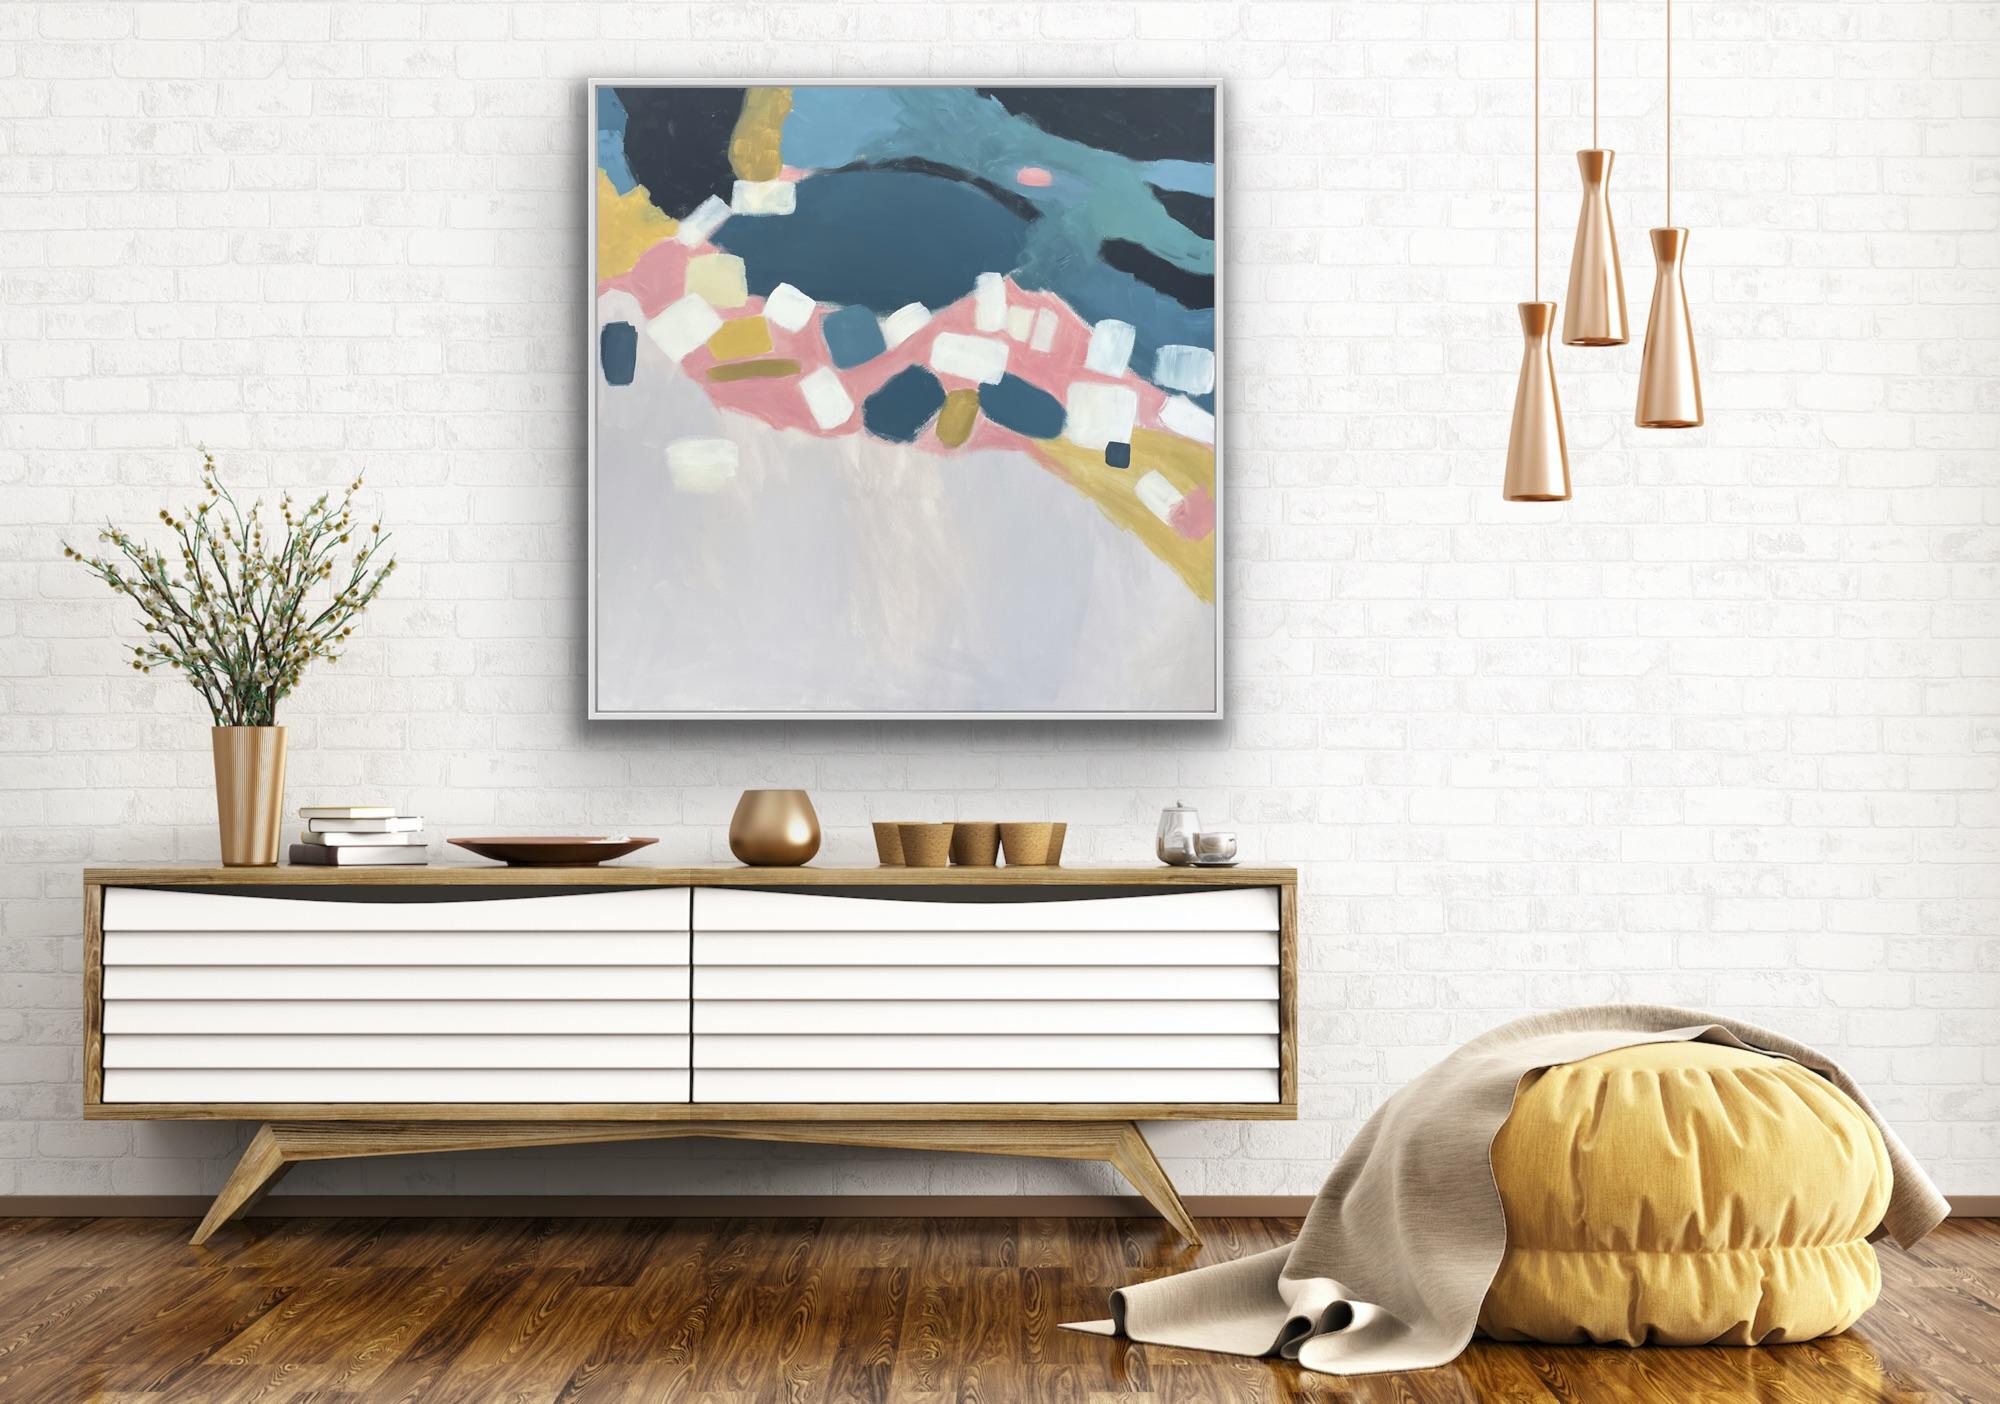 Coastal Reflections II Acrylic on Canvas Painting by Fleur Park, 2022 For Sale 13